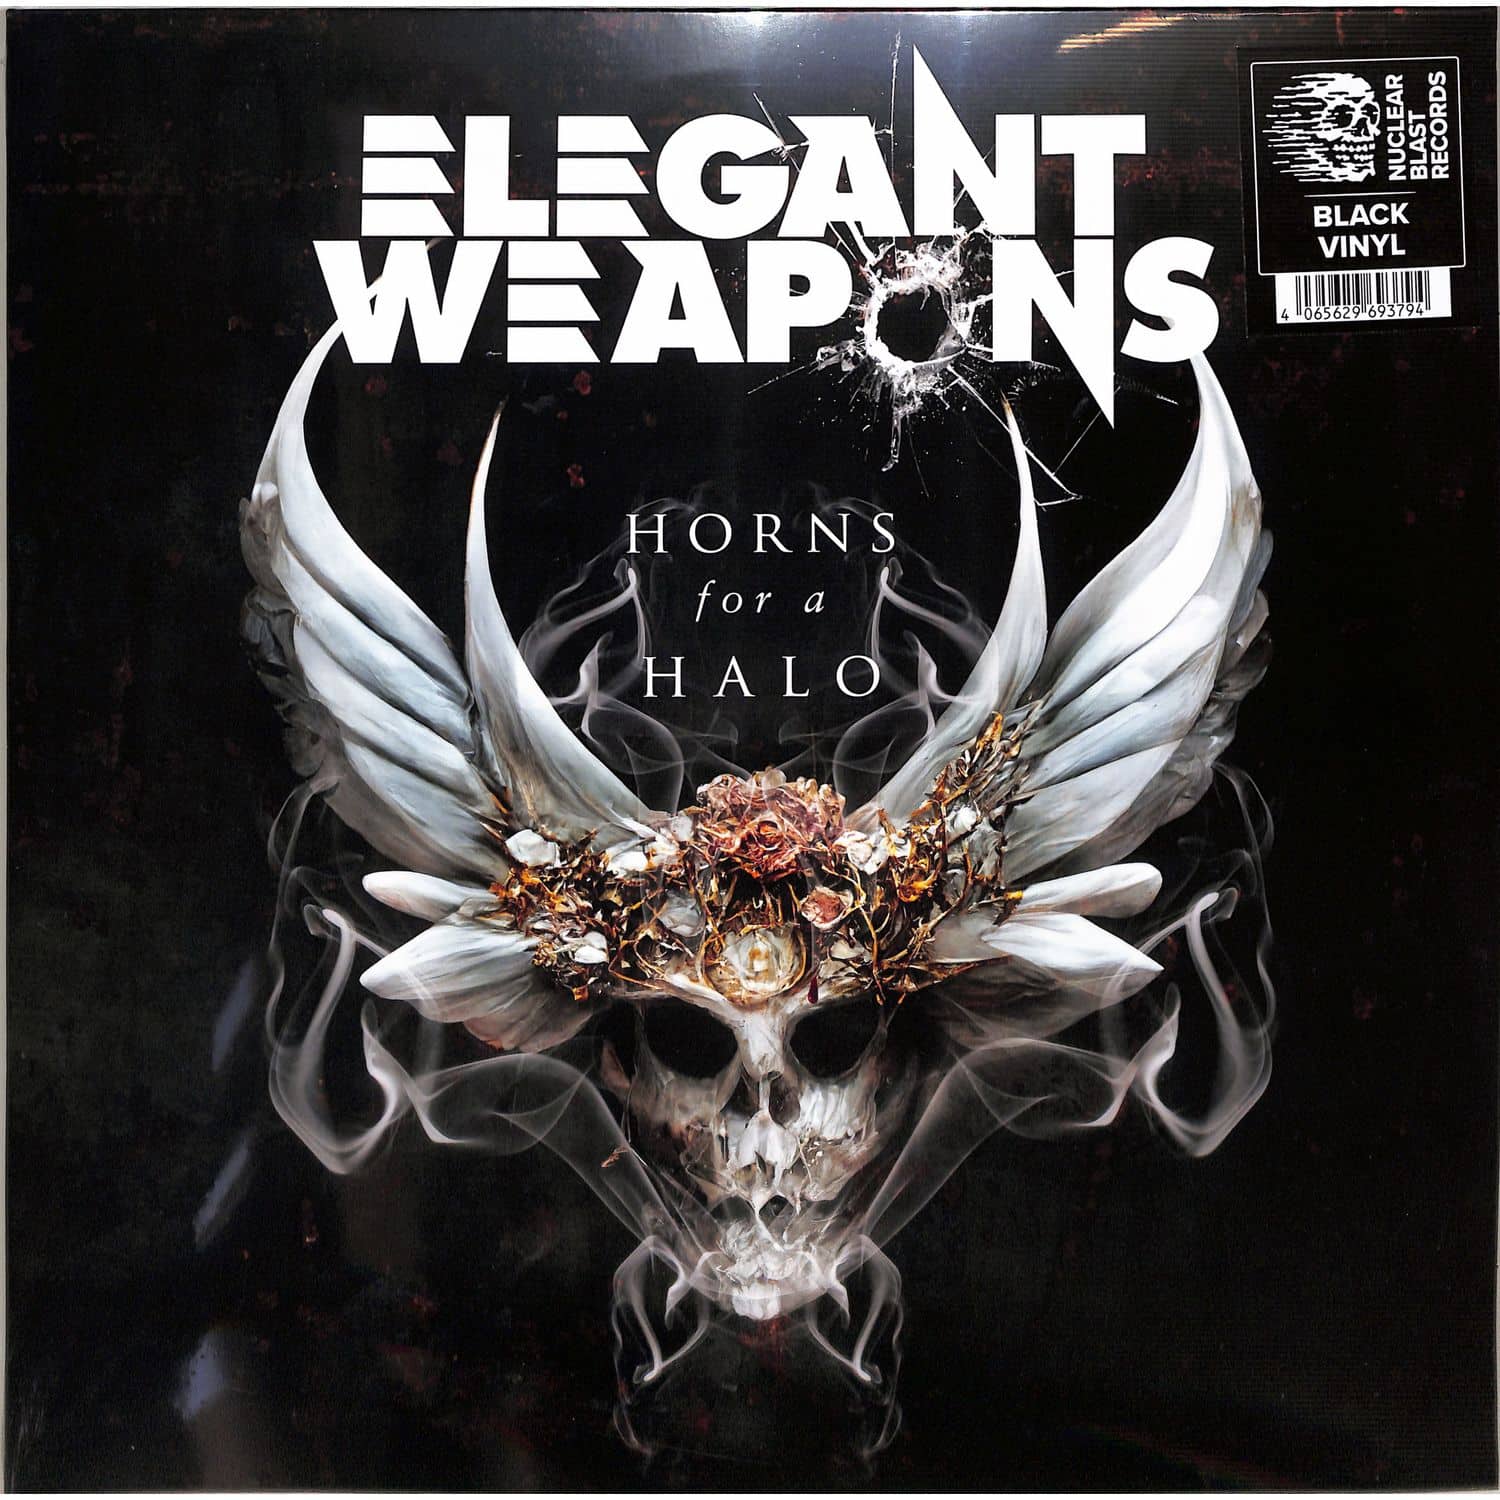 Elegant Weapons - HORNS FOR A HALO 